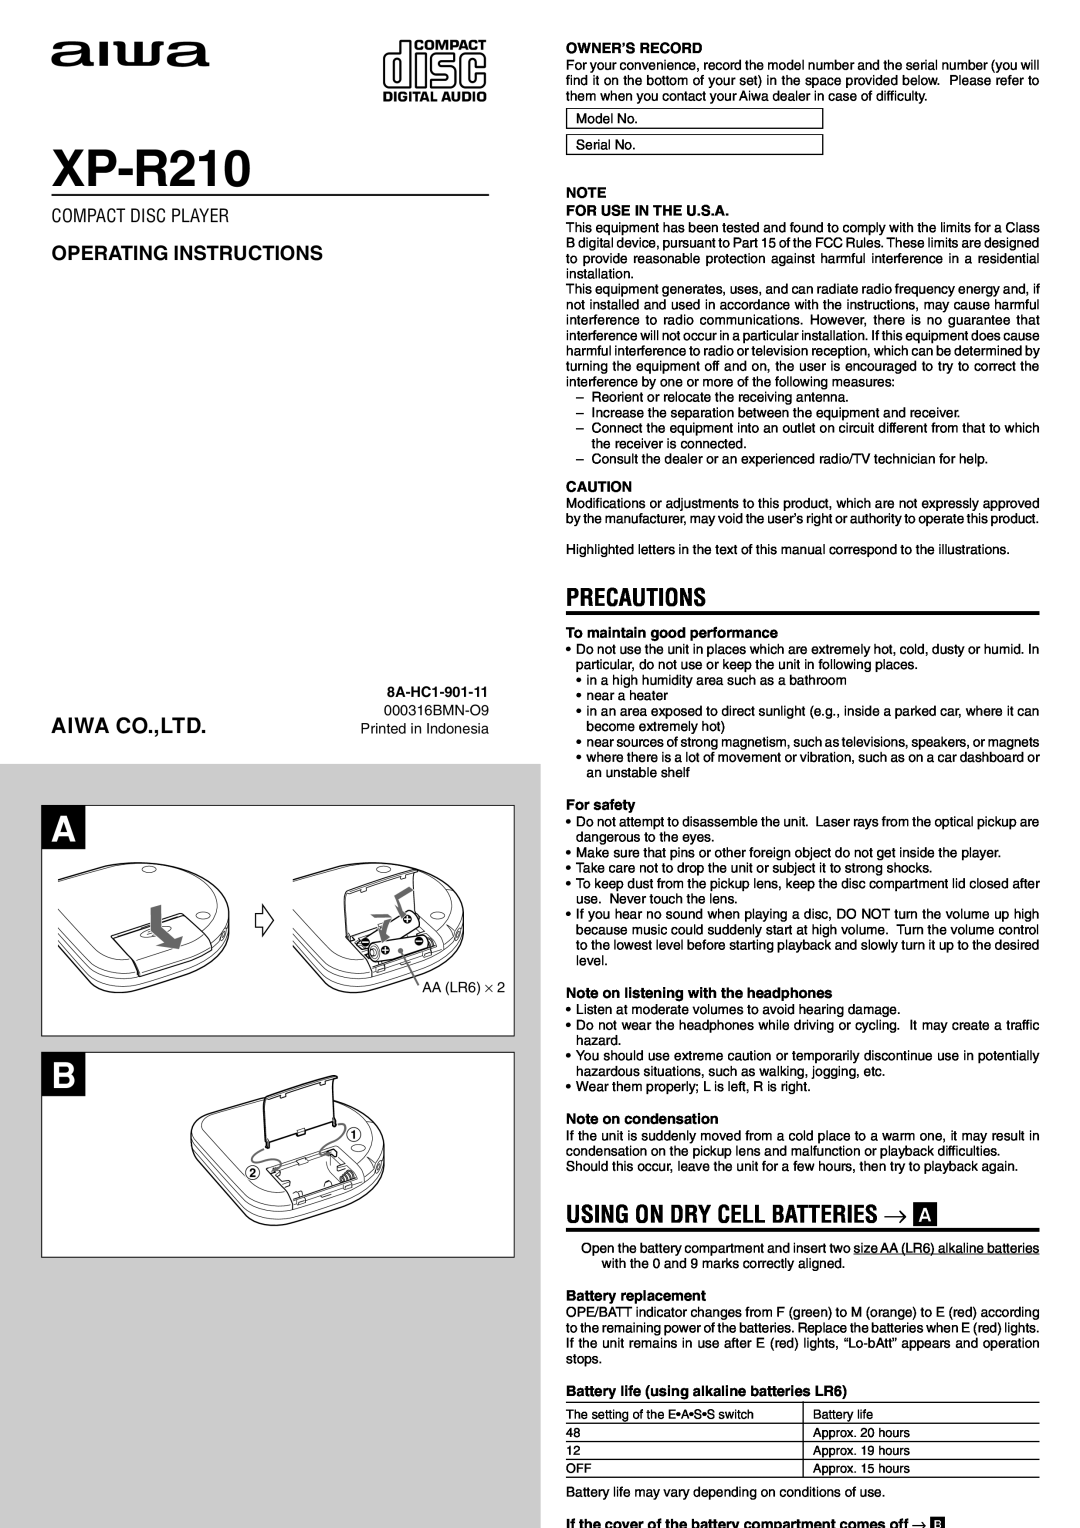 Aiwa XP-R210 operating instructions Precautions, Using On Dry Cell Batteries → A, 8A-HC1-901-11, Owner’S Record 